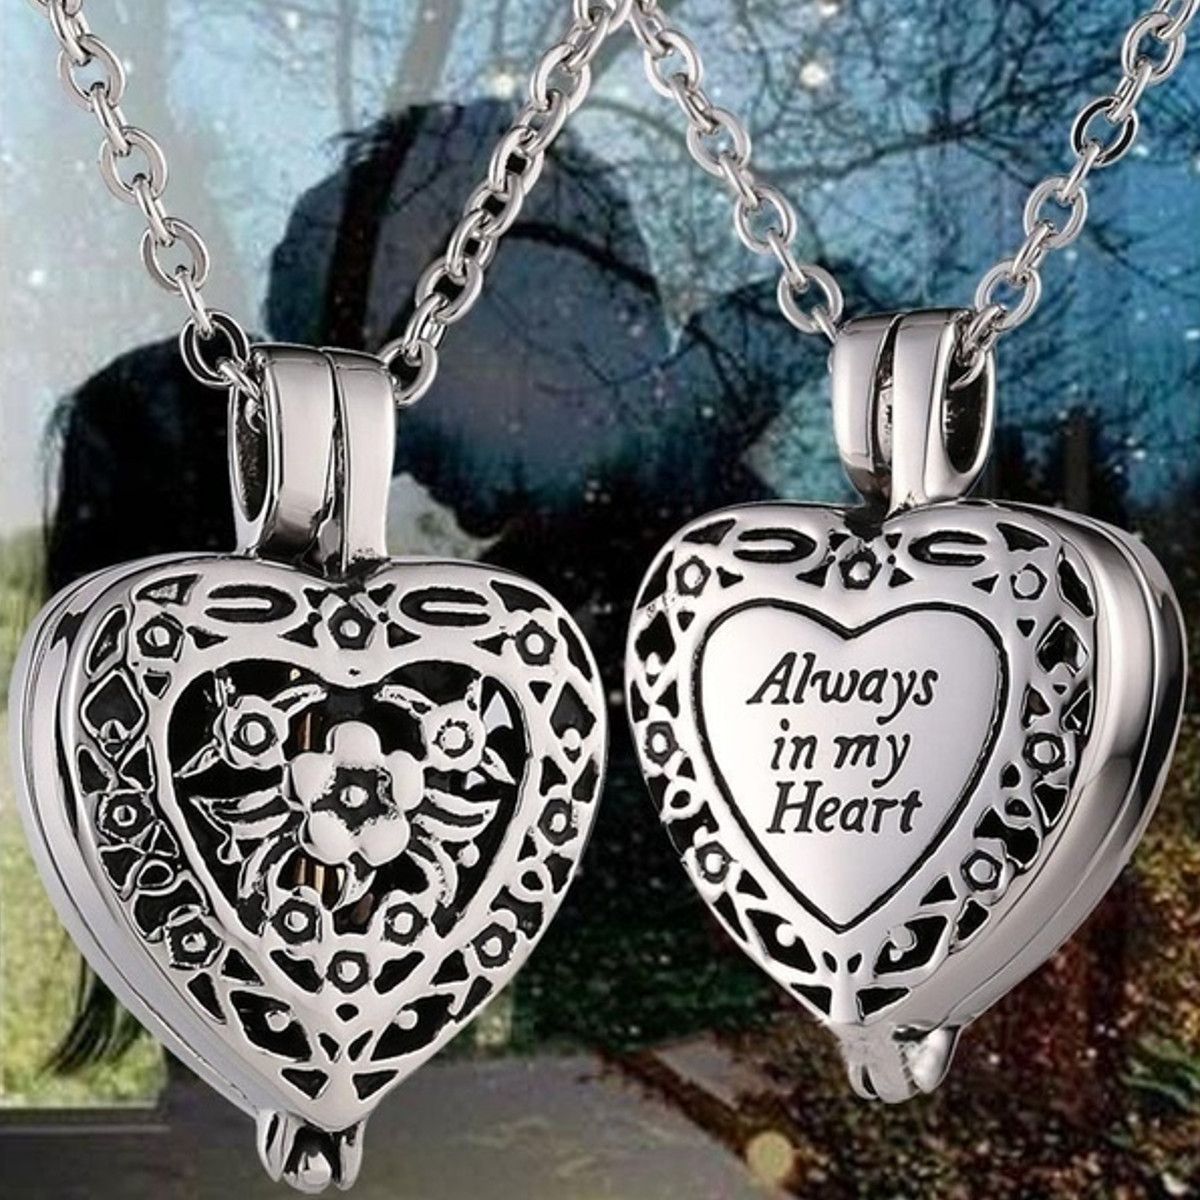 Always-in-my-Heart-Locket-Cremation-Urn-Hollow-Necklace-Pendant-Jewelry-For-Ashe-1569697